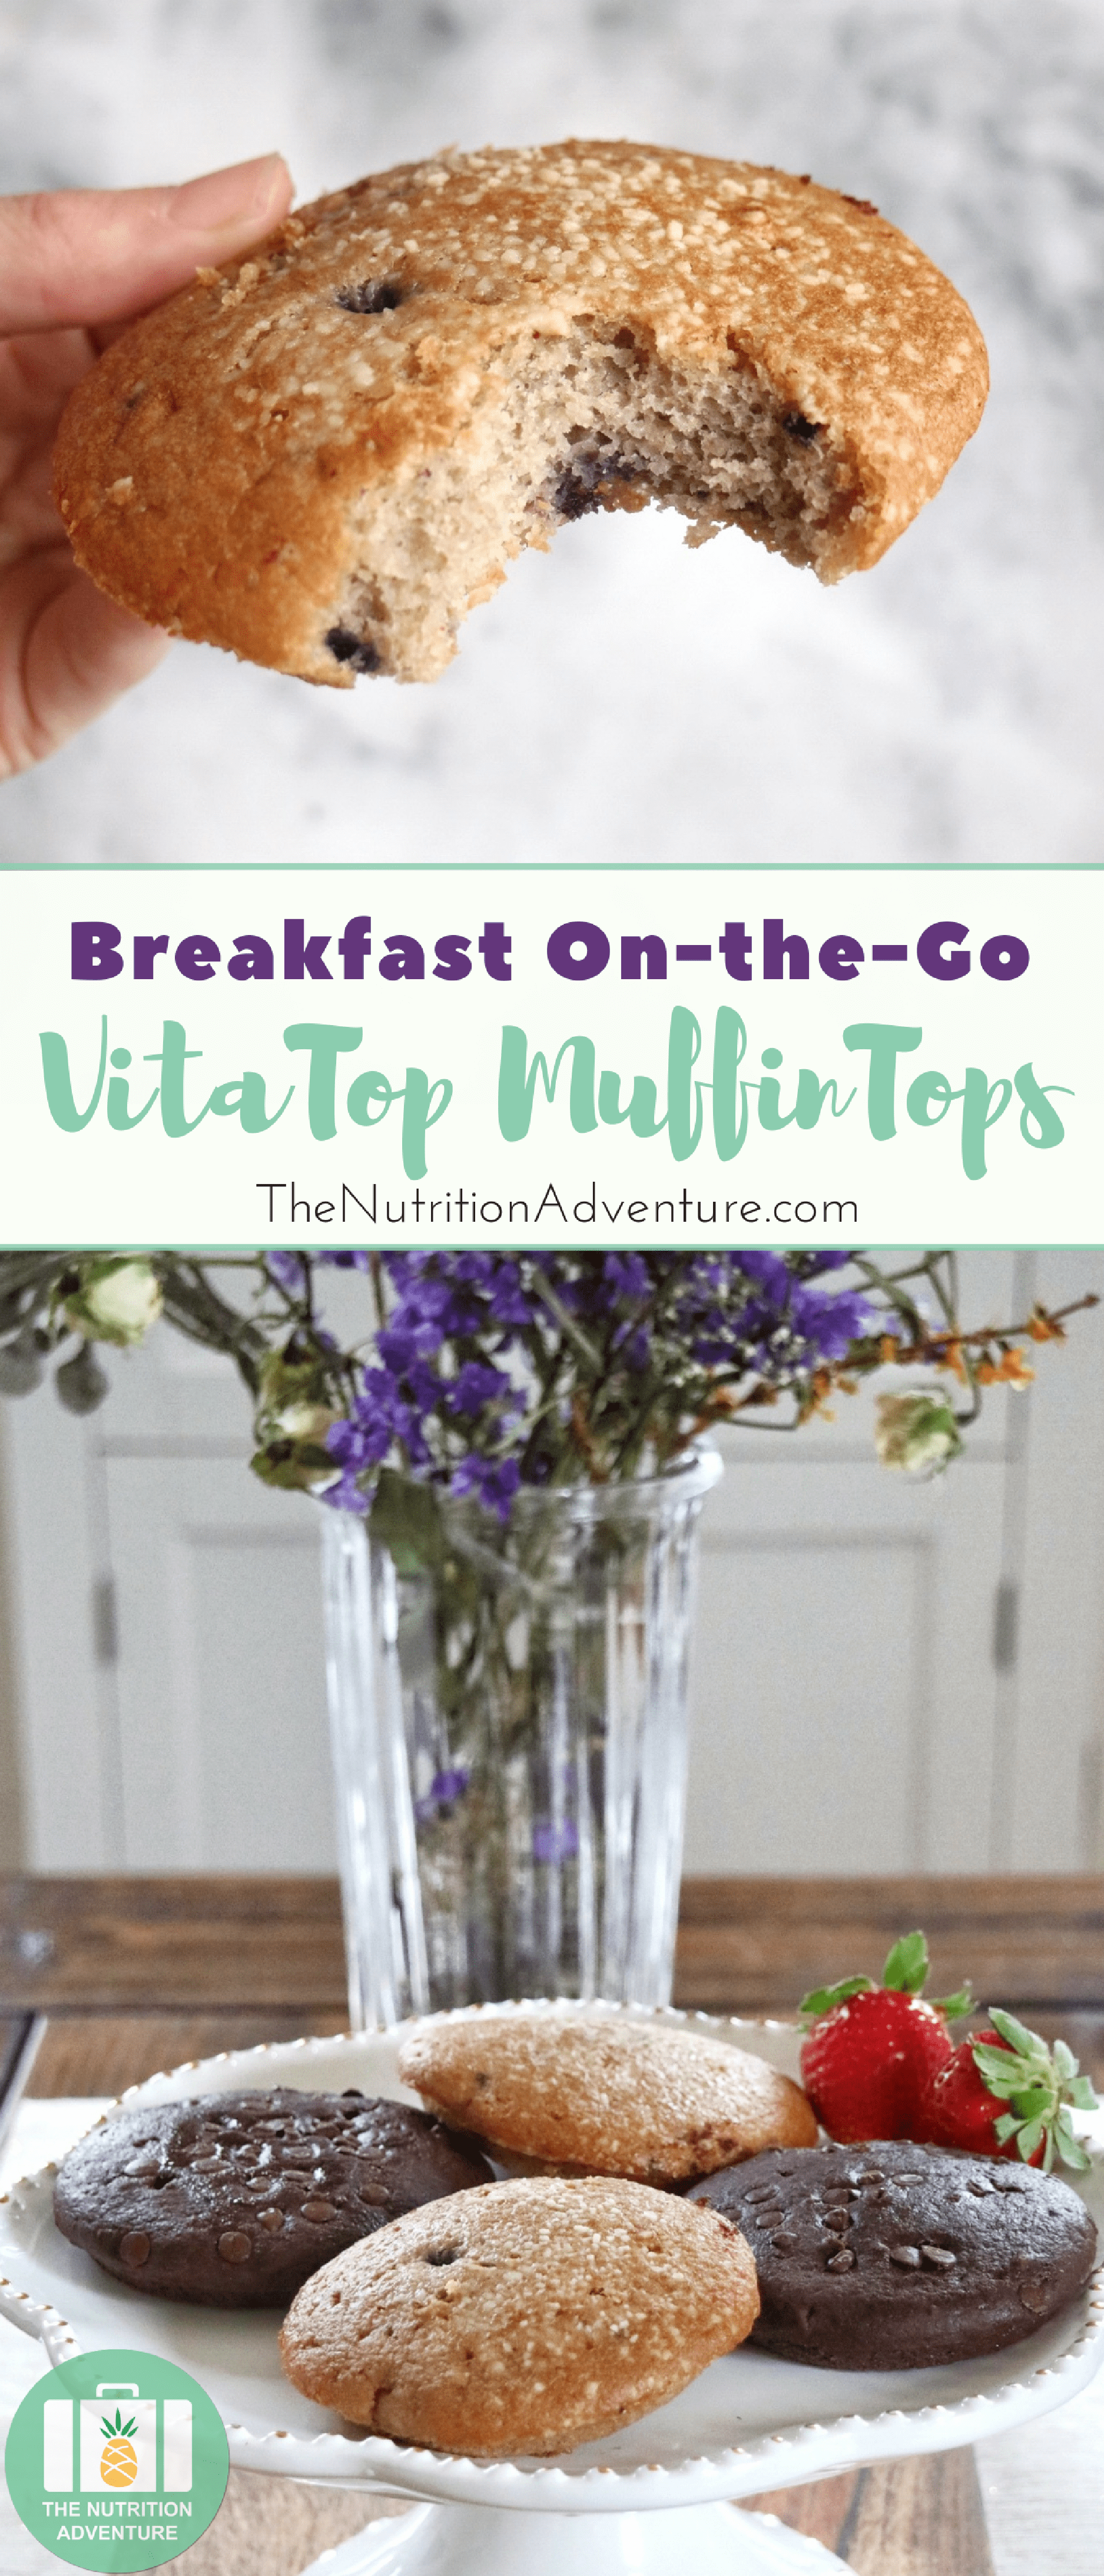 VitaTops MuffinsTops: Perfect for Breakfast On-the-Go!